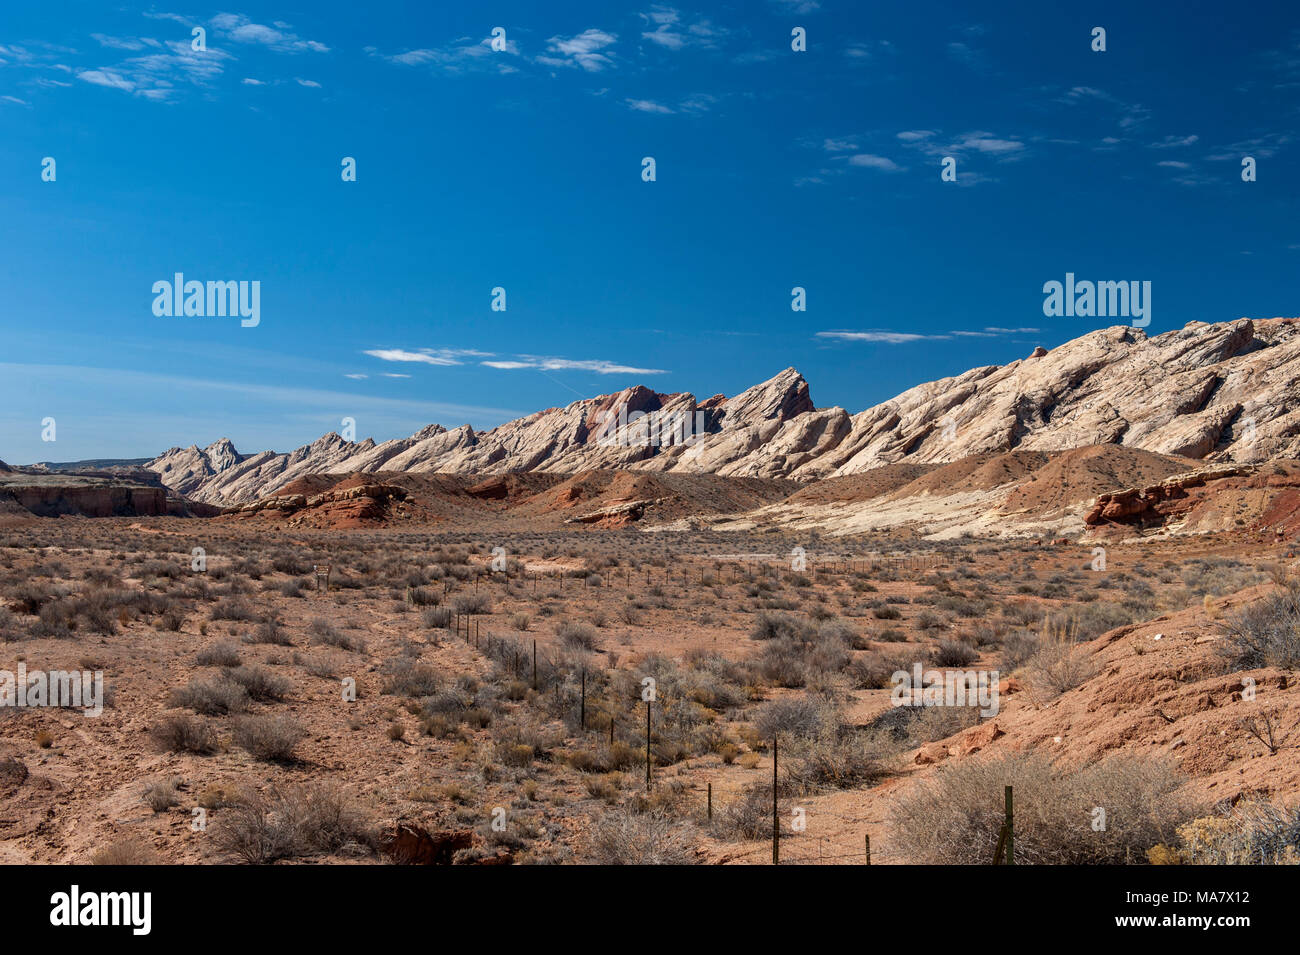 The San Rafael Reef, at the eastern edge of the San Rafael Swell, as seen from Interstate 70 near the town of Green River, Utah. Stock Photo